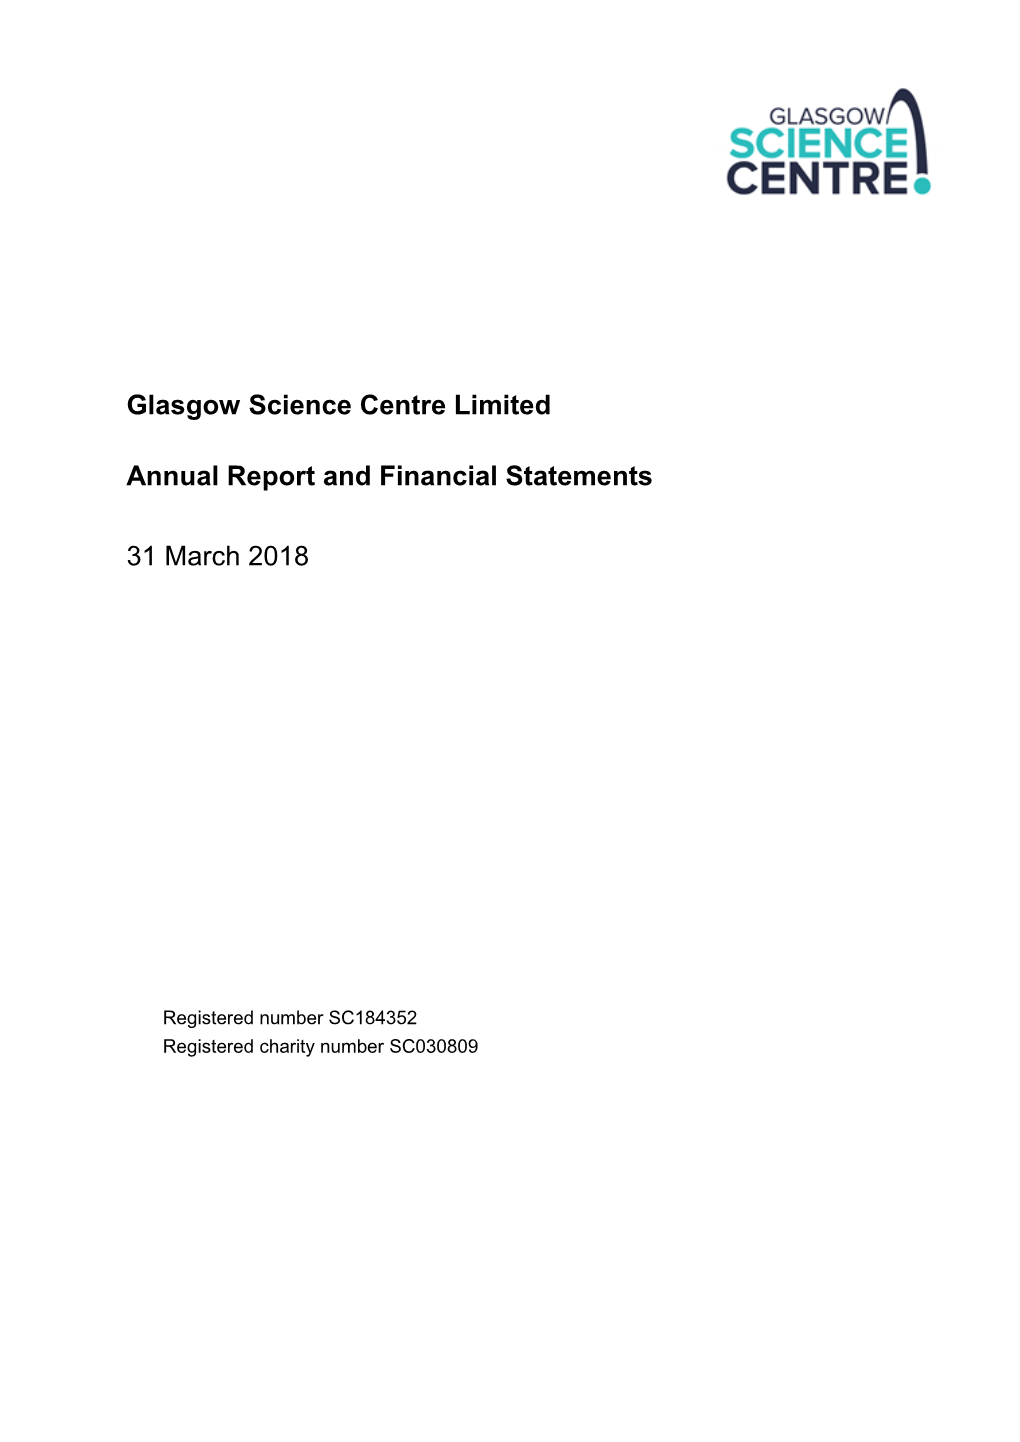 Statutory Accounts for Glasgow Science Centre Limited Trust